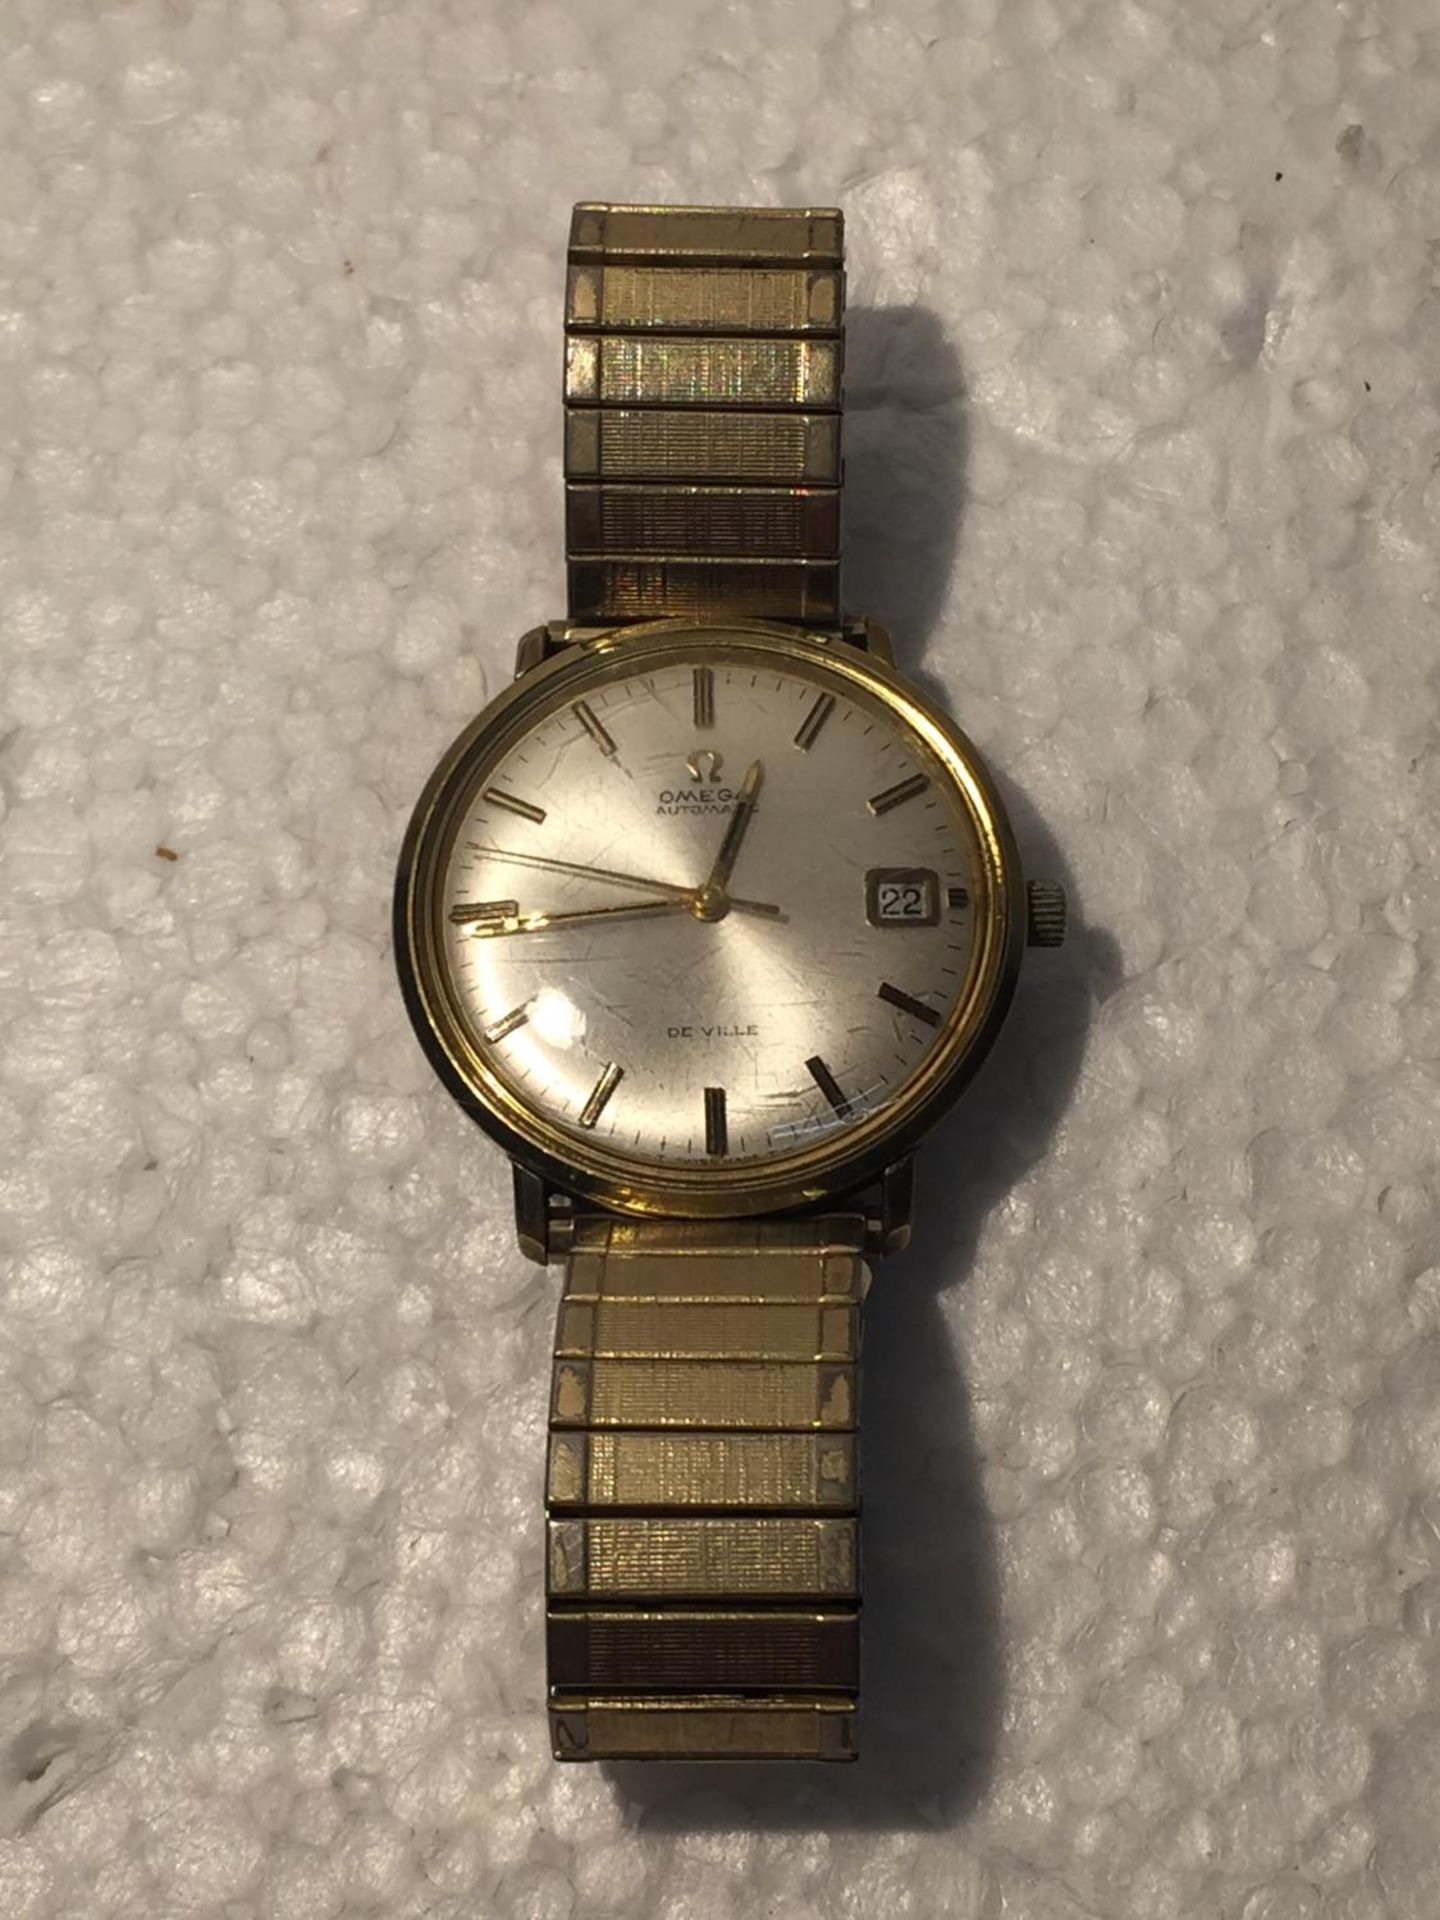 A VINTAGE OMEGA AUTOMATIC DE VILLE WATCH POSSIBLY 9CT GOLD WRIST WATCH IN WORKING ORDER WHEN